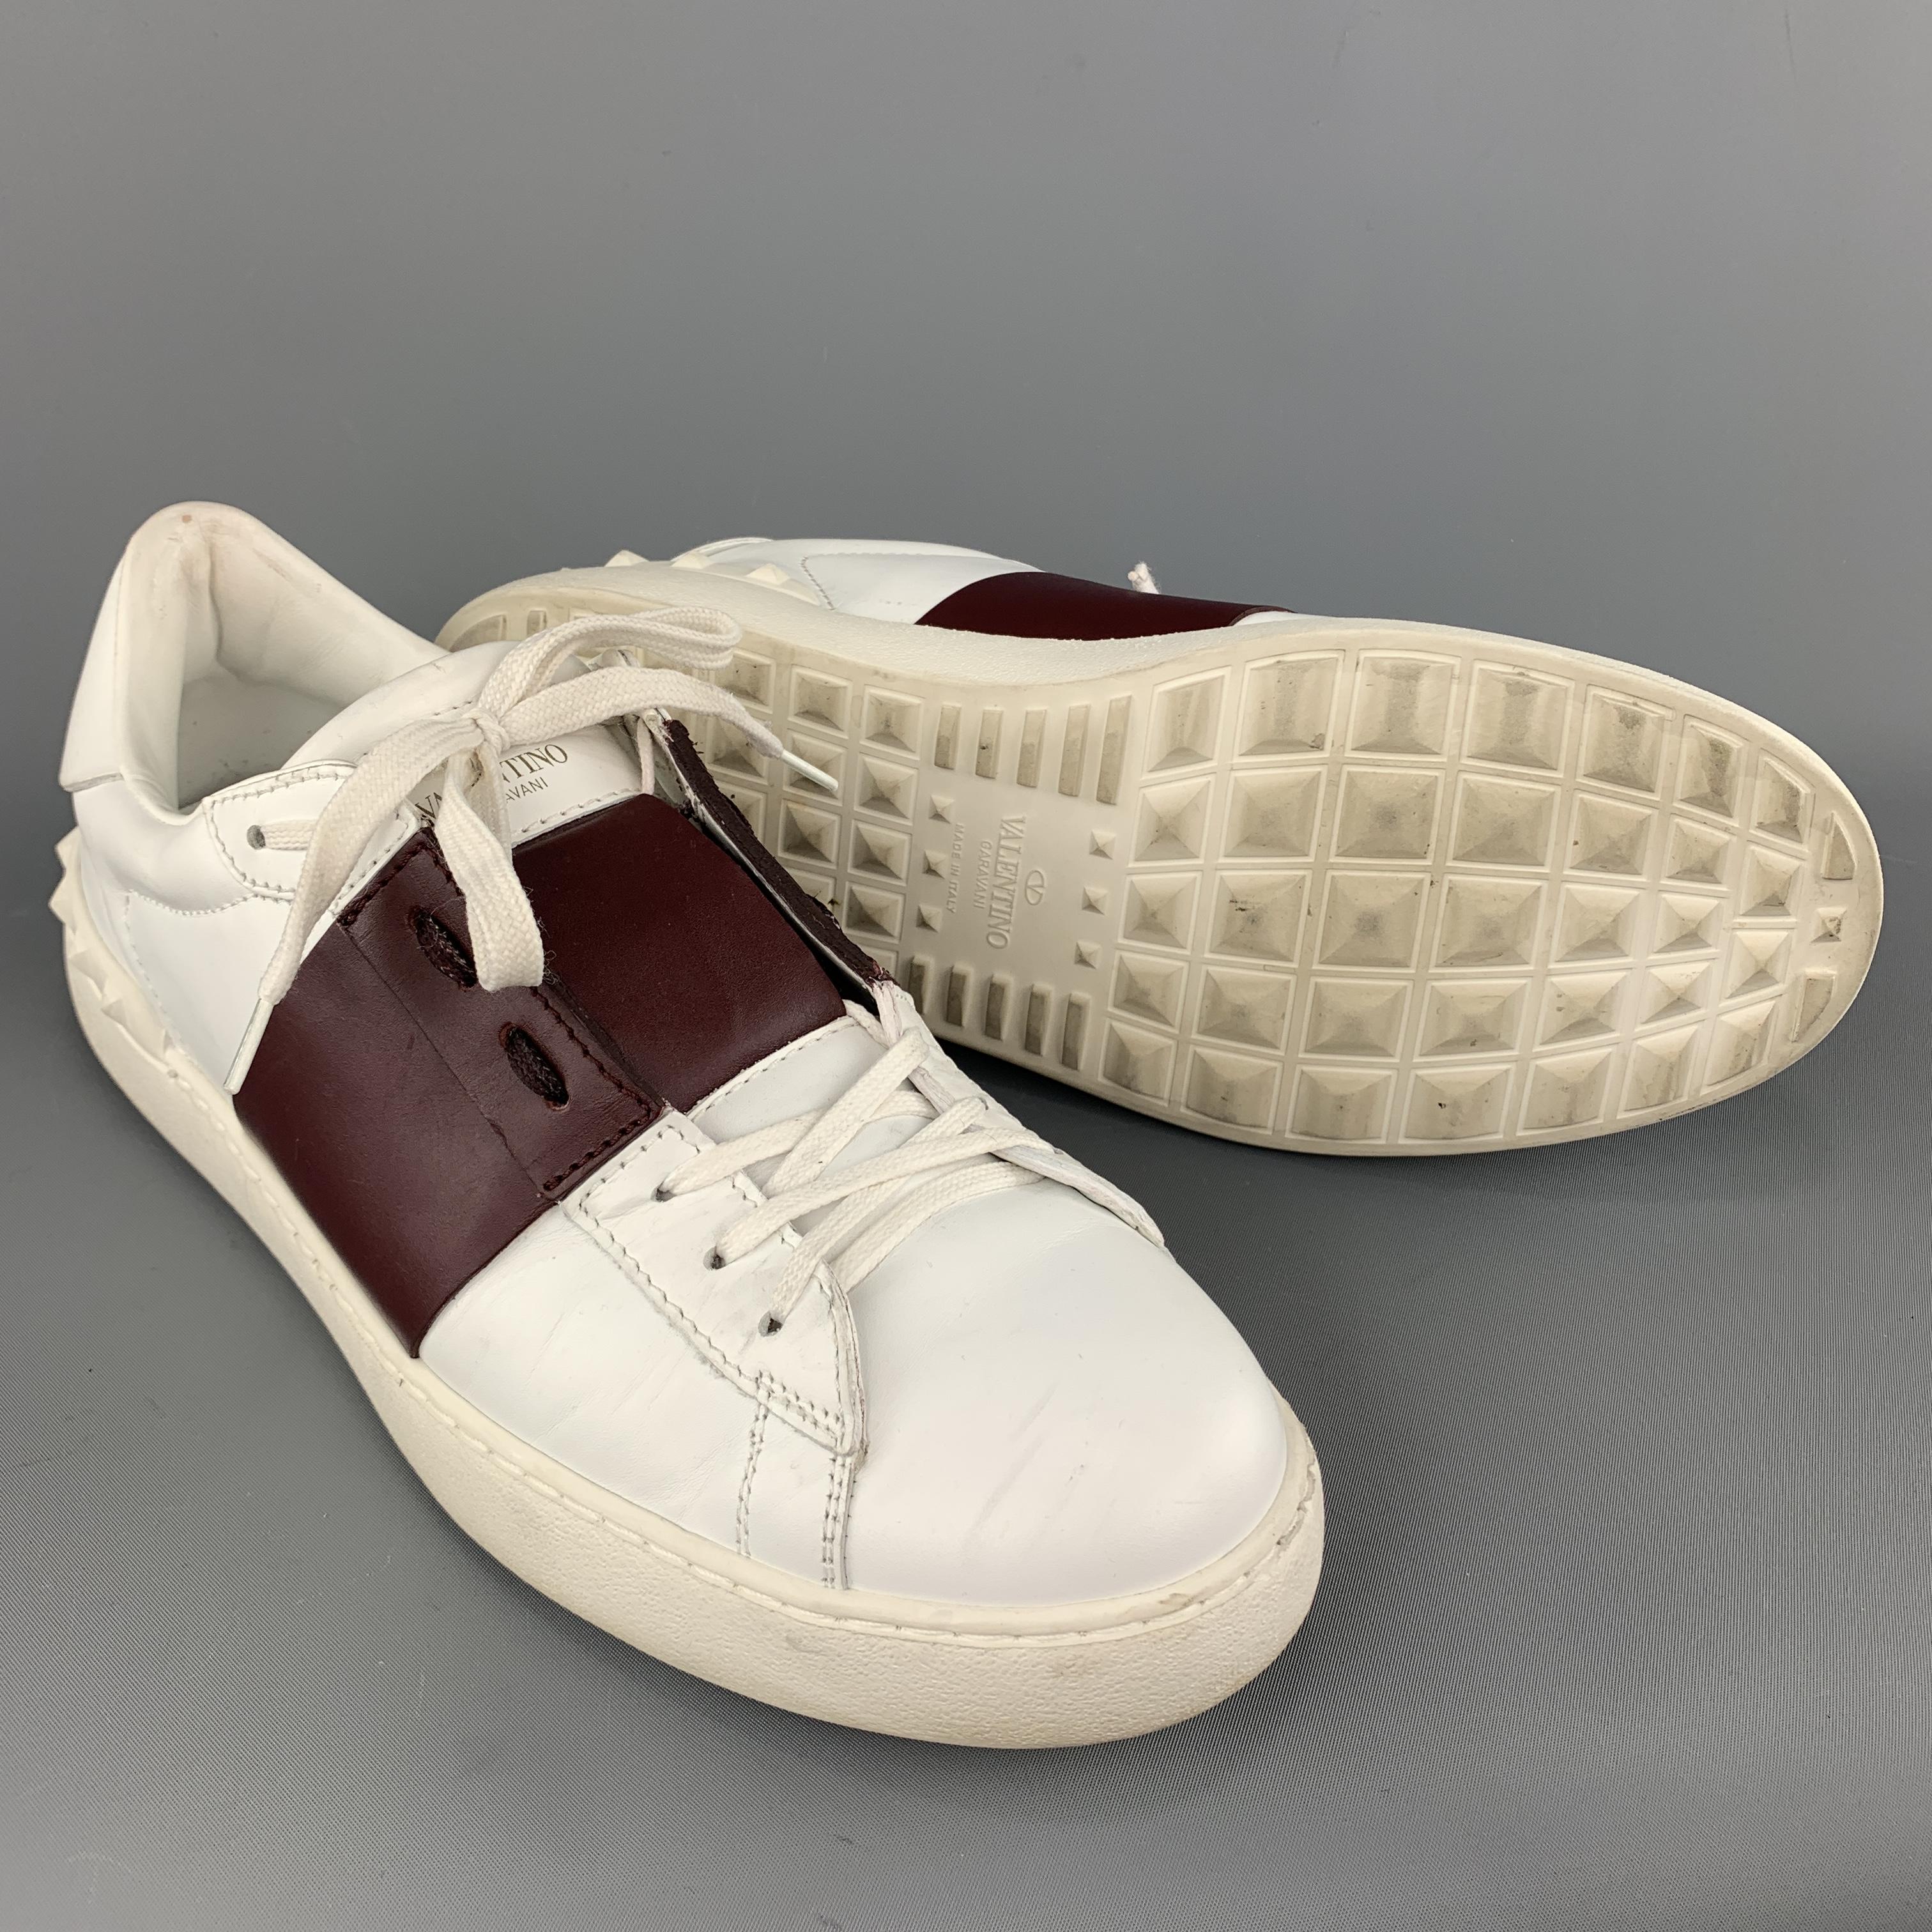 Men's VALENTINO Size 12 White & Burgundy Color Block Leather Rockstud Low Top Lace Up 